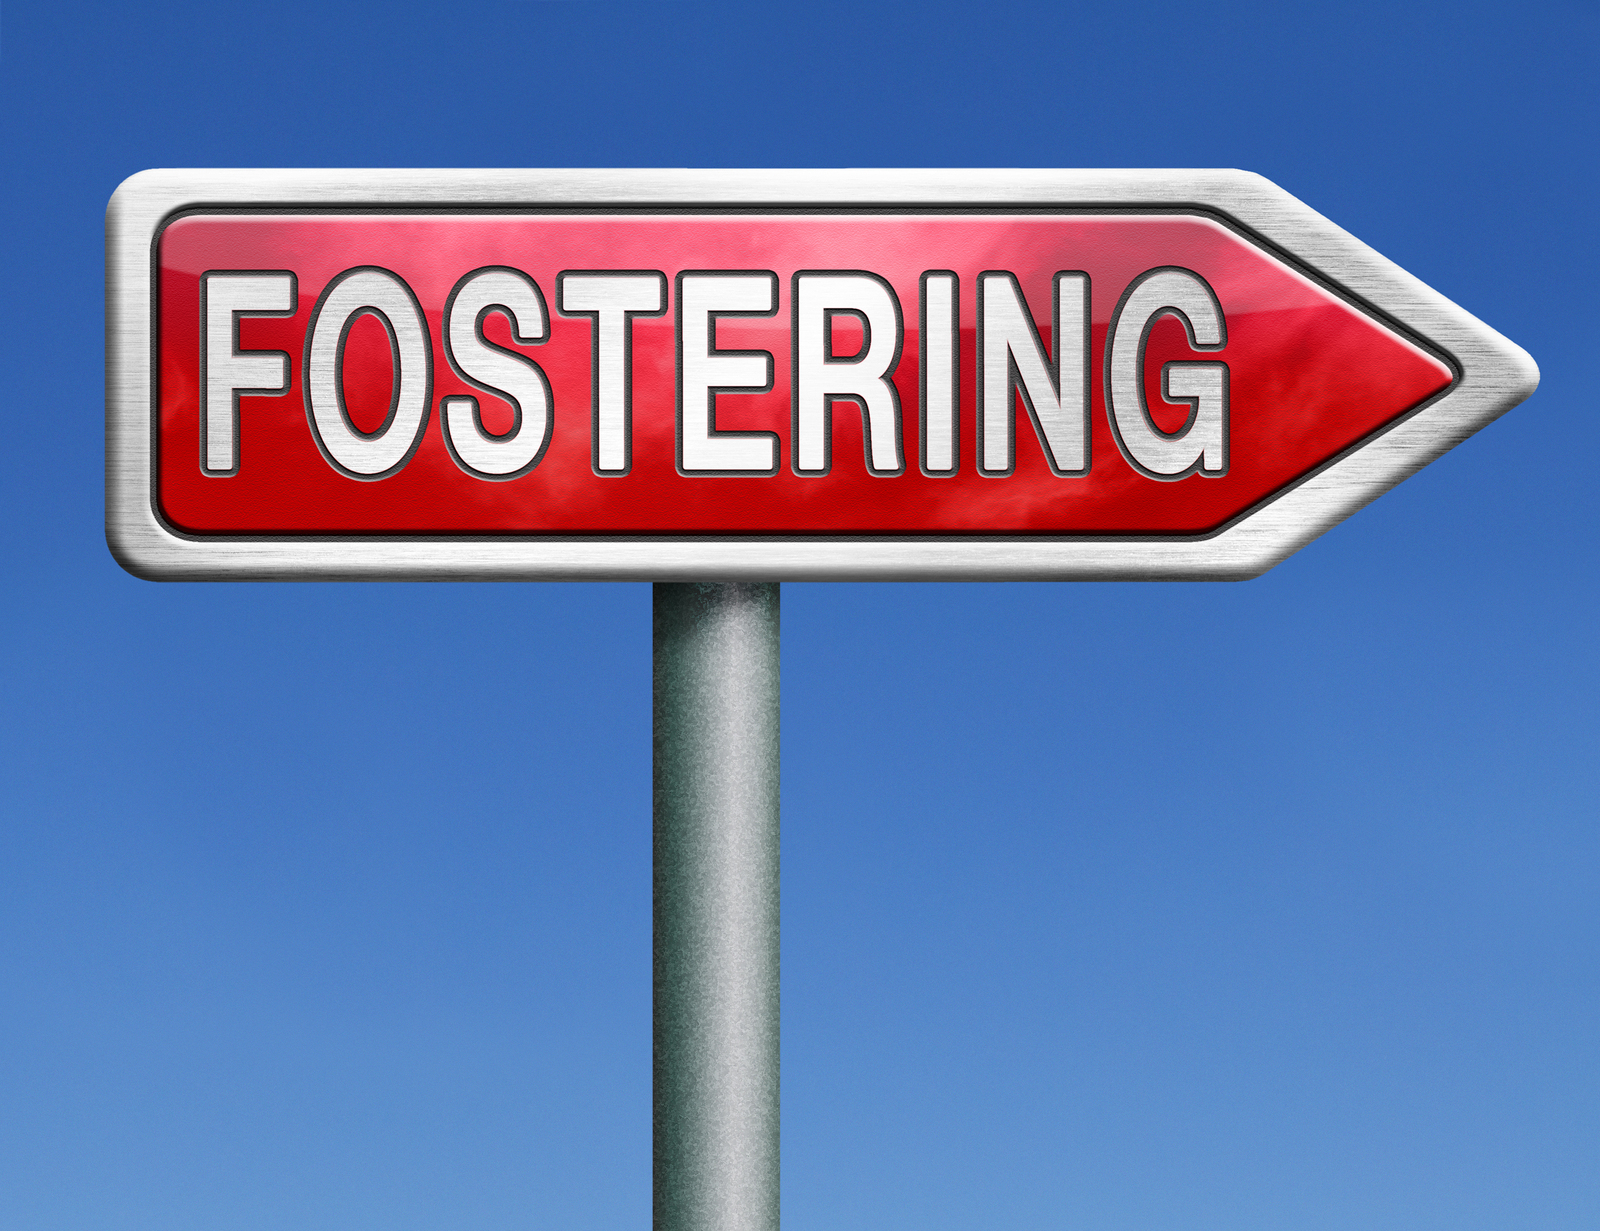 Foster Care & The Church